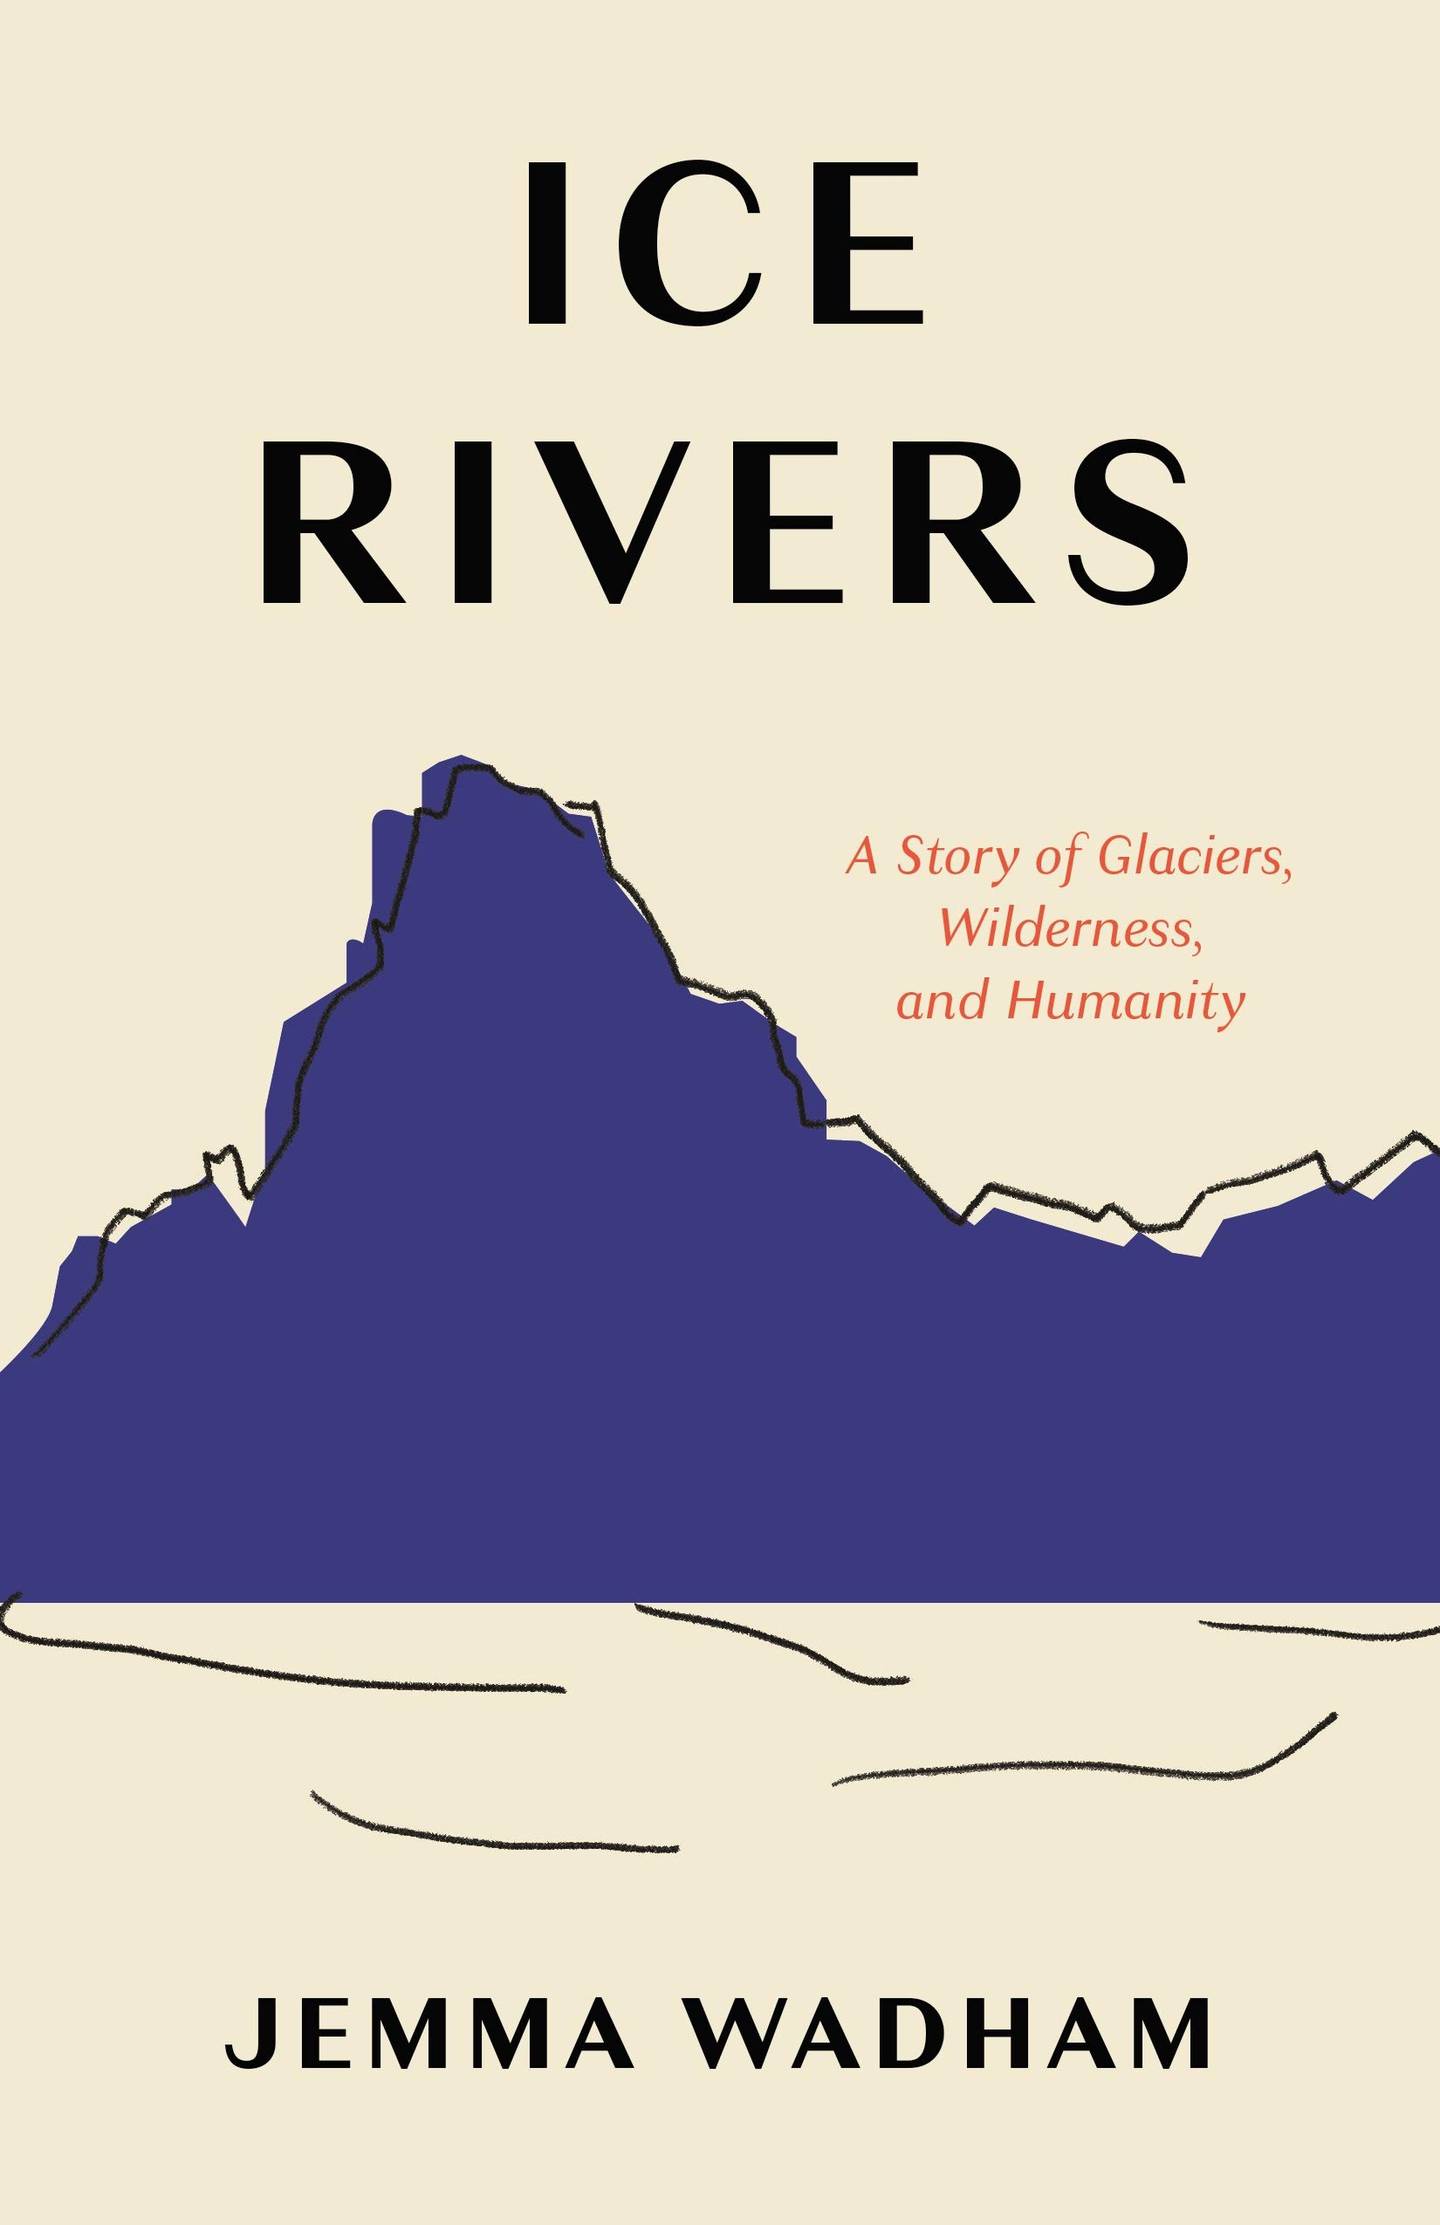 "Ice Rivers: A Story of Glaciers, Wilderness, and Humanity"